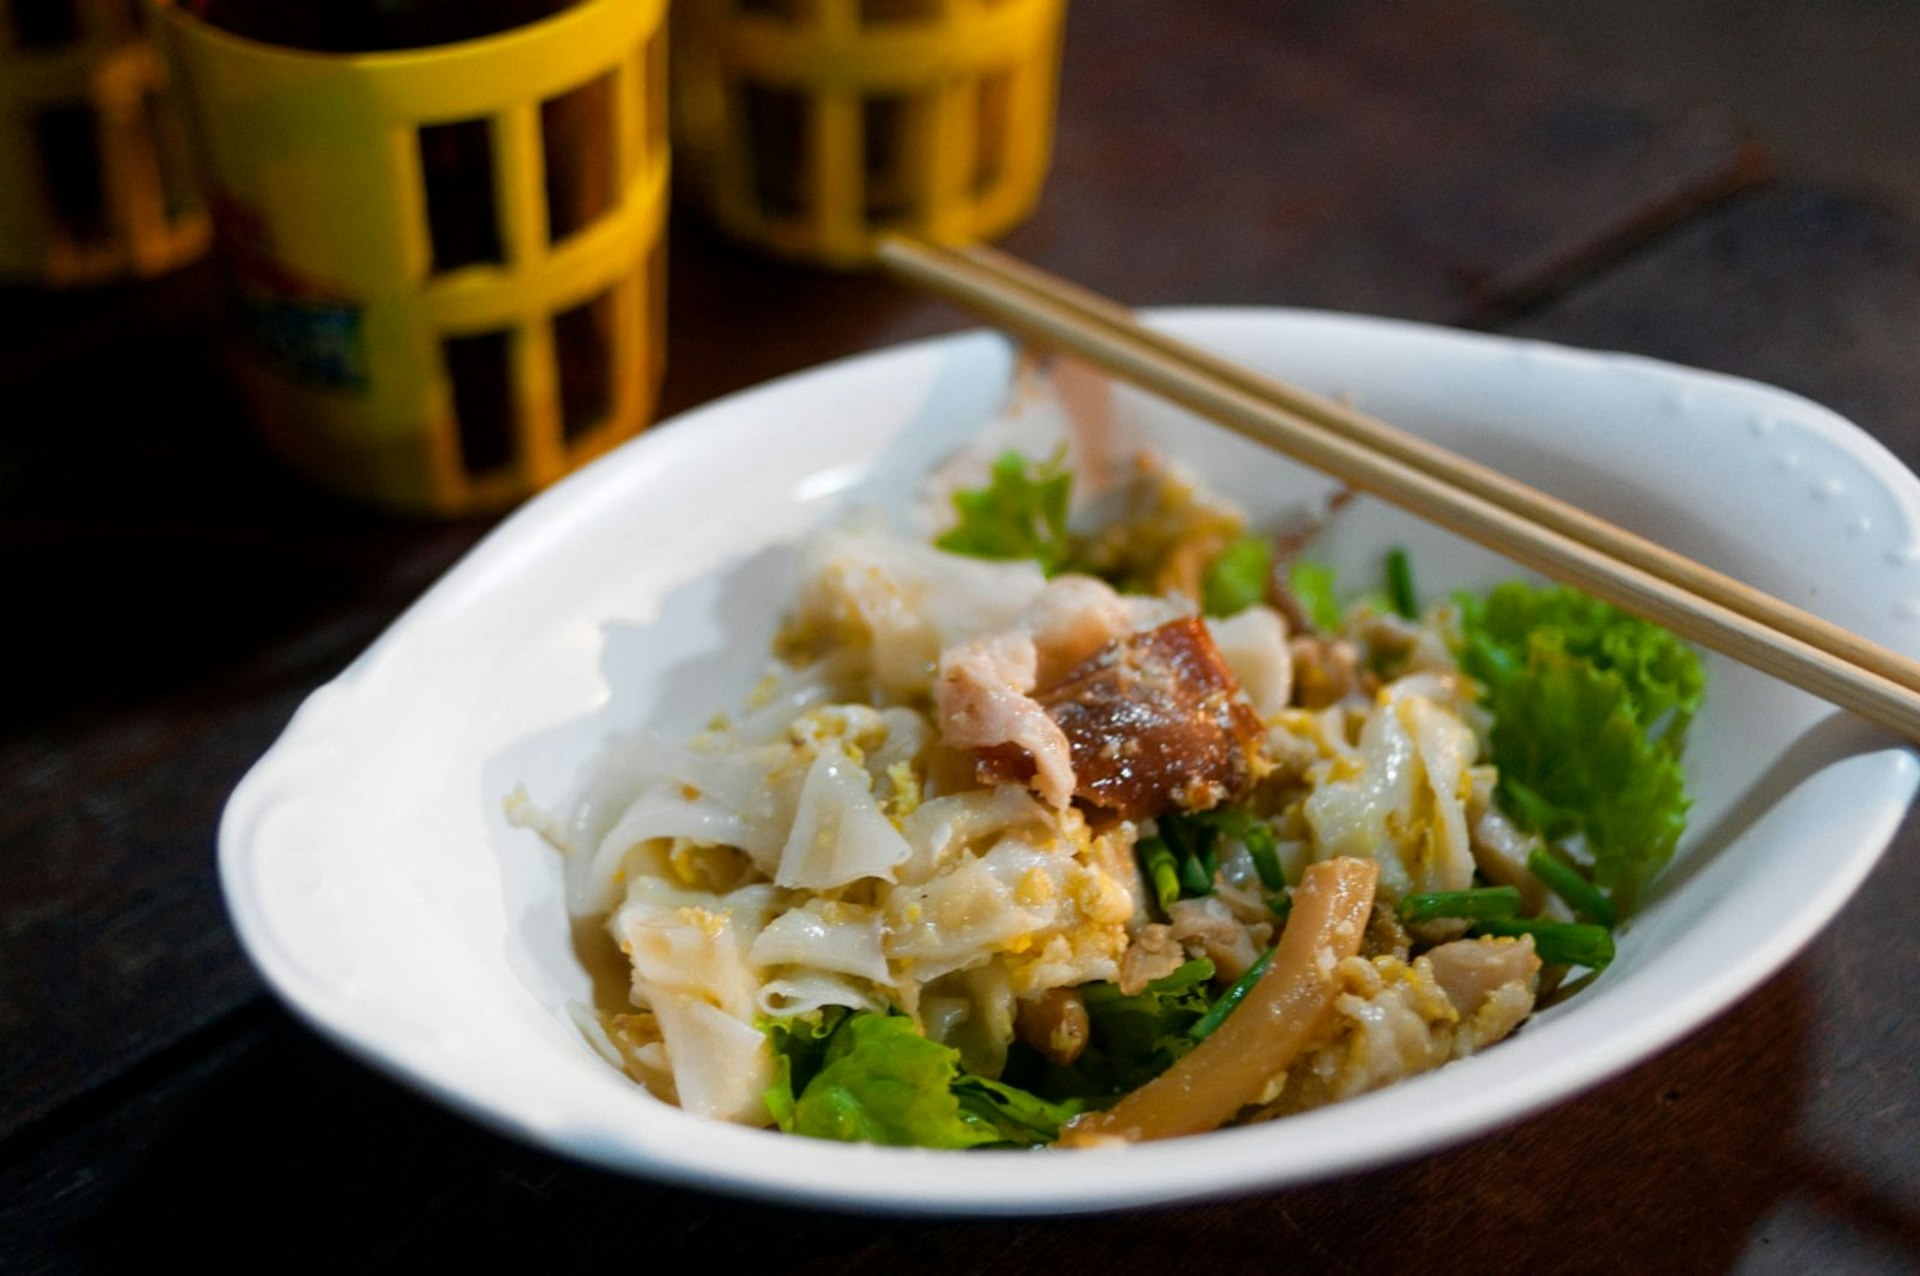 A dish of gooay teeo kooa gai, rice noodles fried with chicken and egg, as sold in Bangkok’s Chinatown © Austin Bush / Lonely Planet